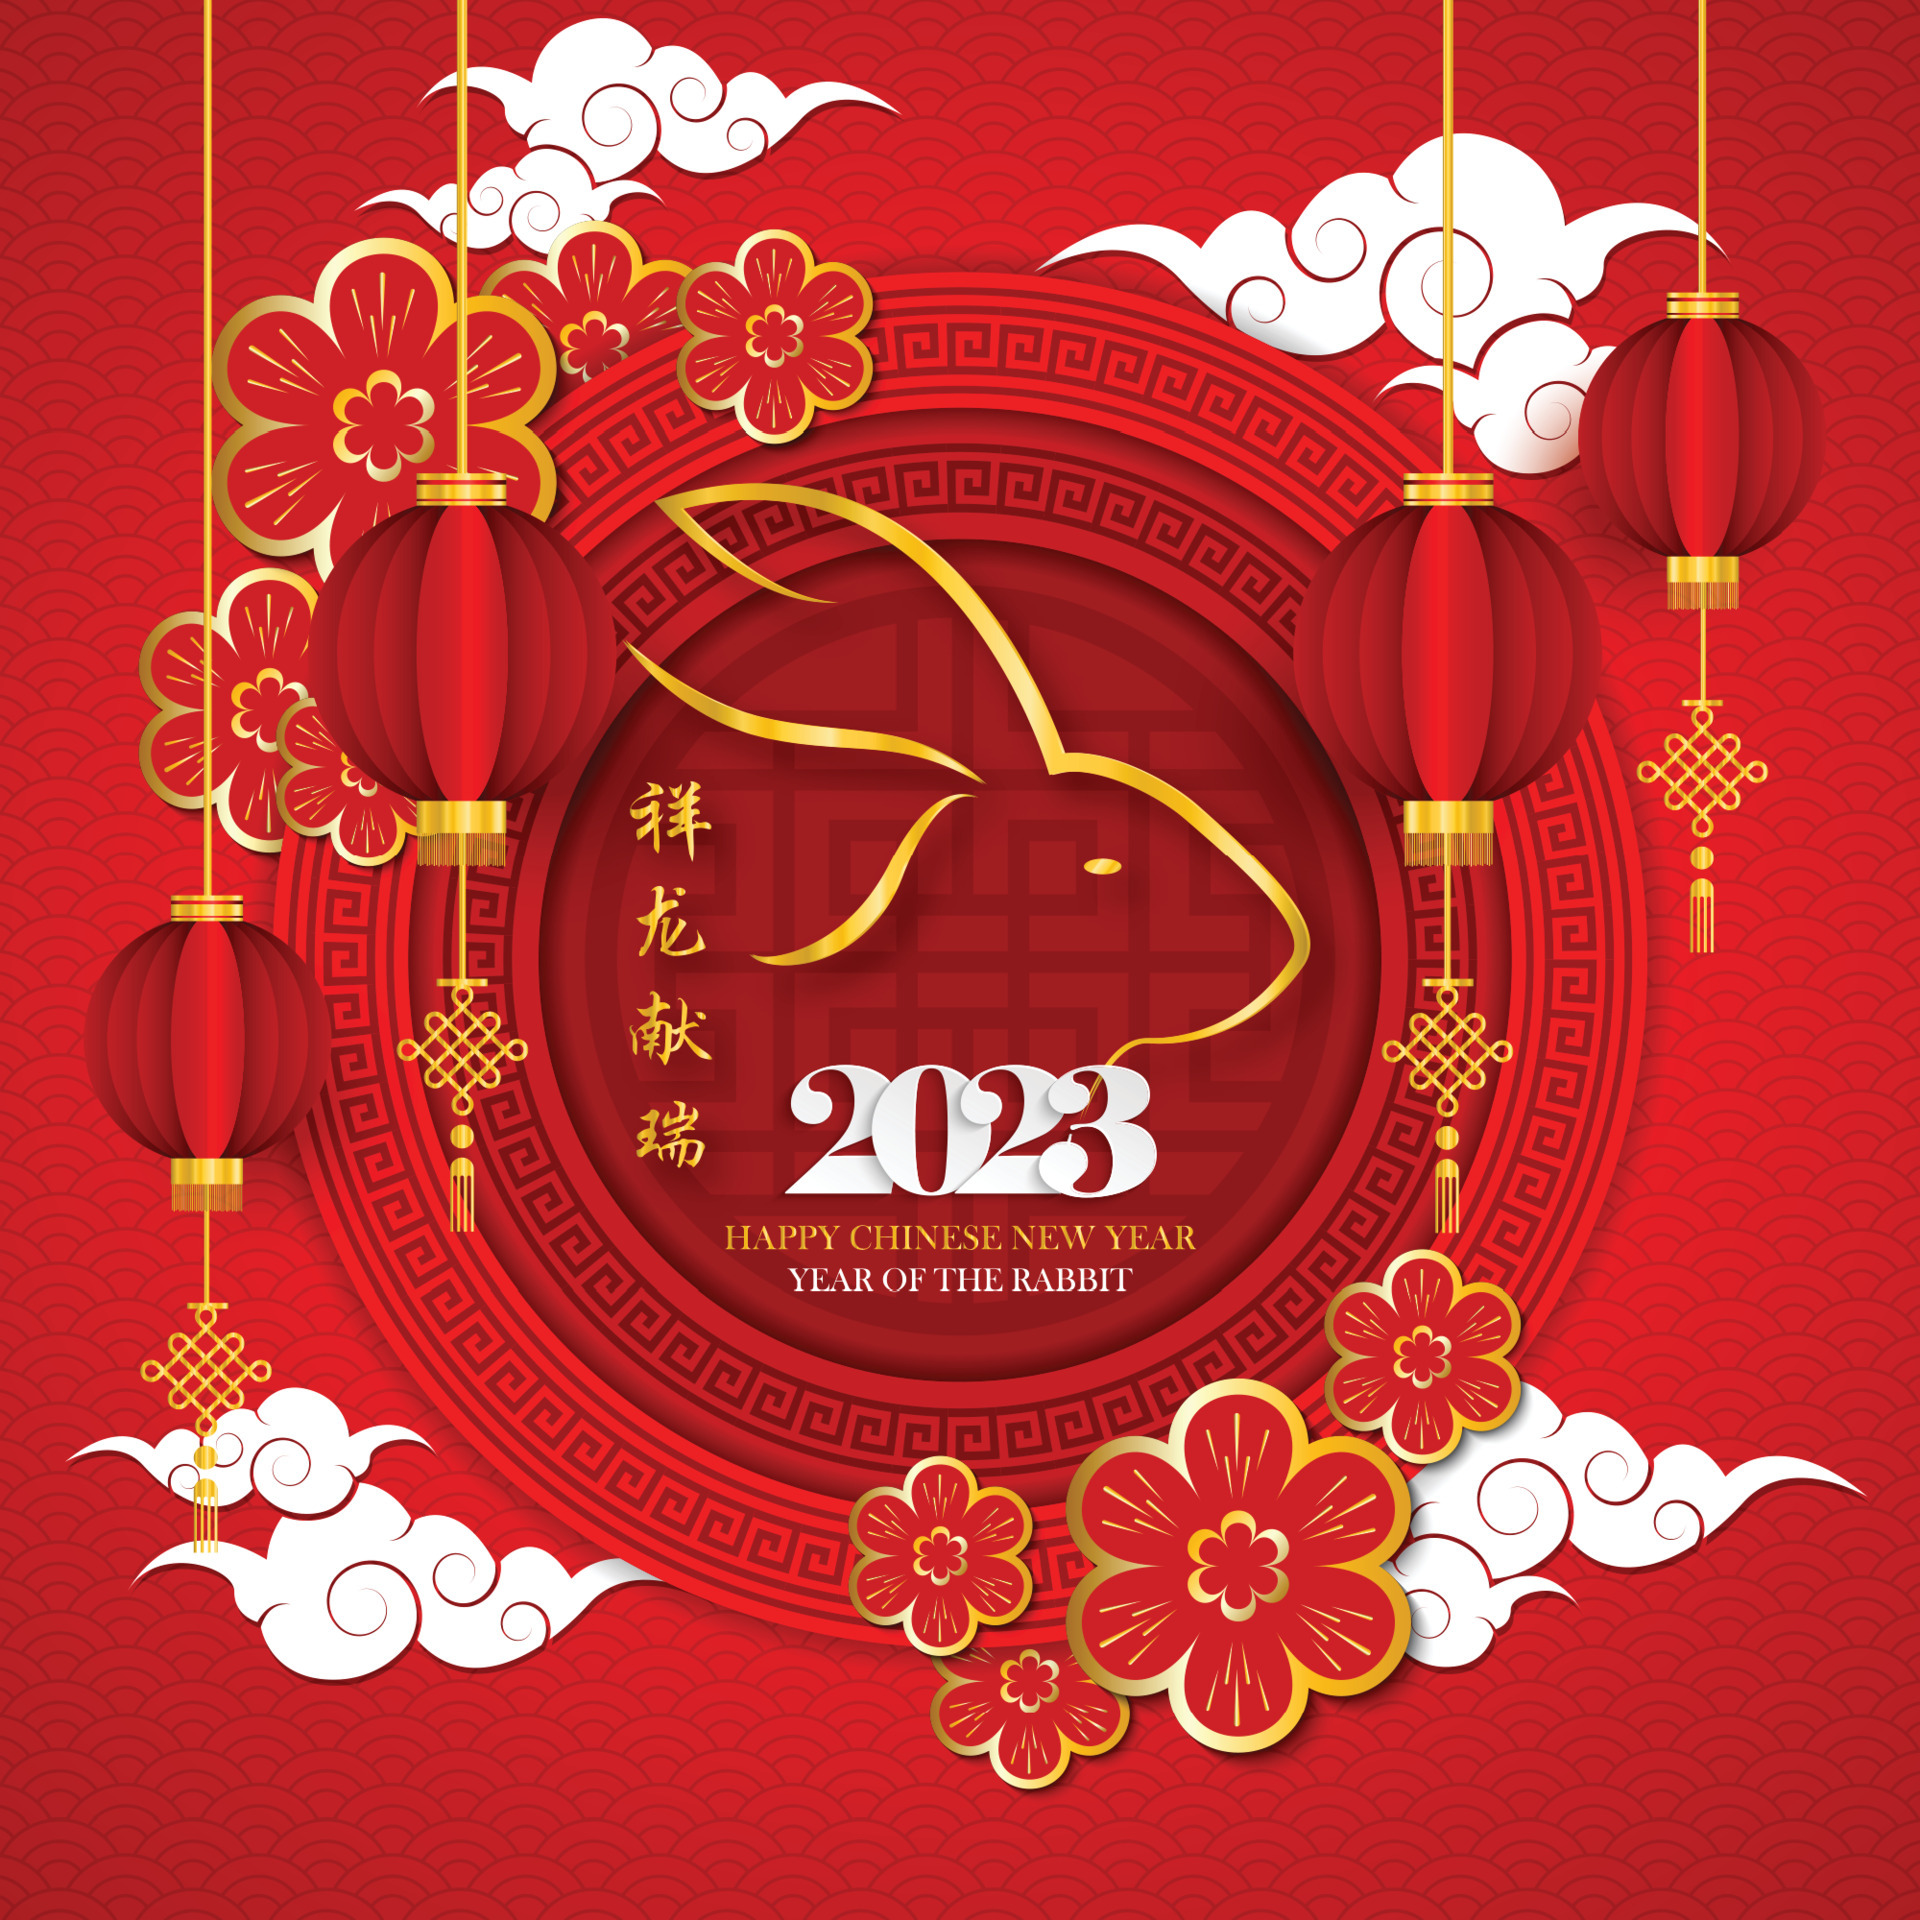 Chinese new year 2023, year of the rabbit with Gold rabbit drawing for 2023 in the chinese pattern circle frame on red background. Chinese text translation happy new year 2023, year of